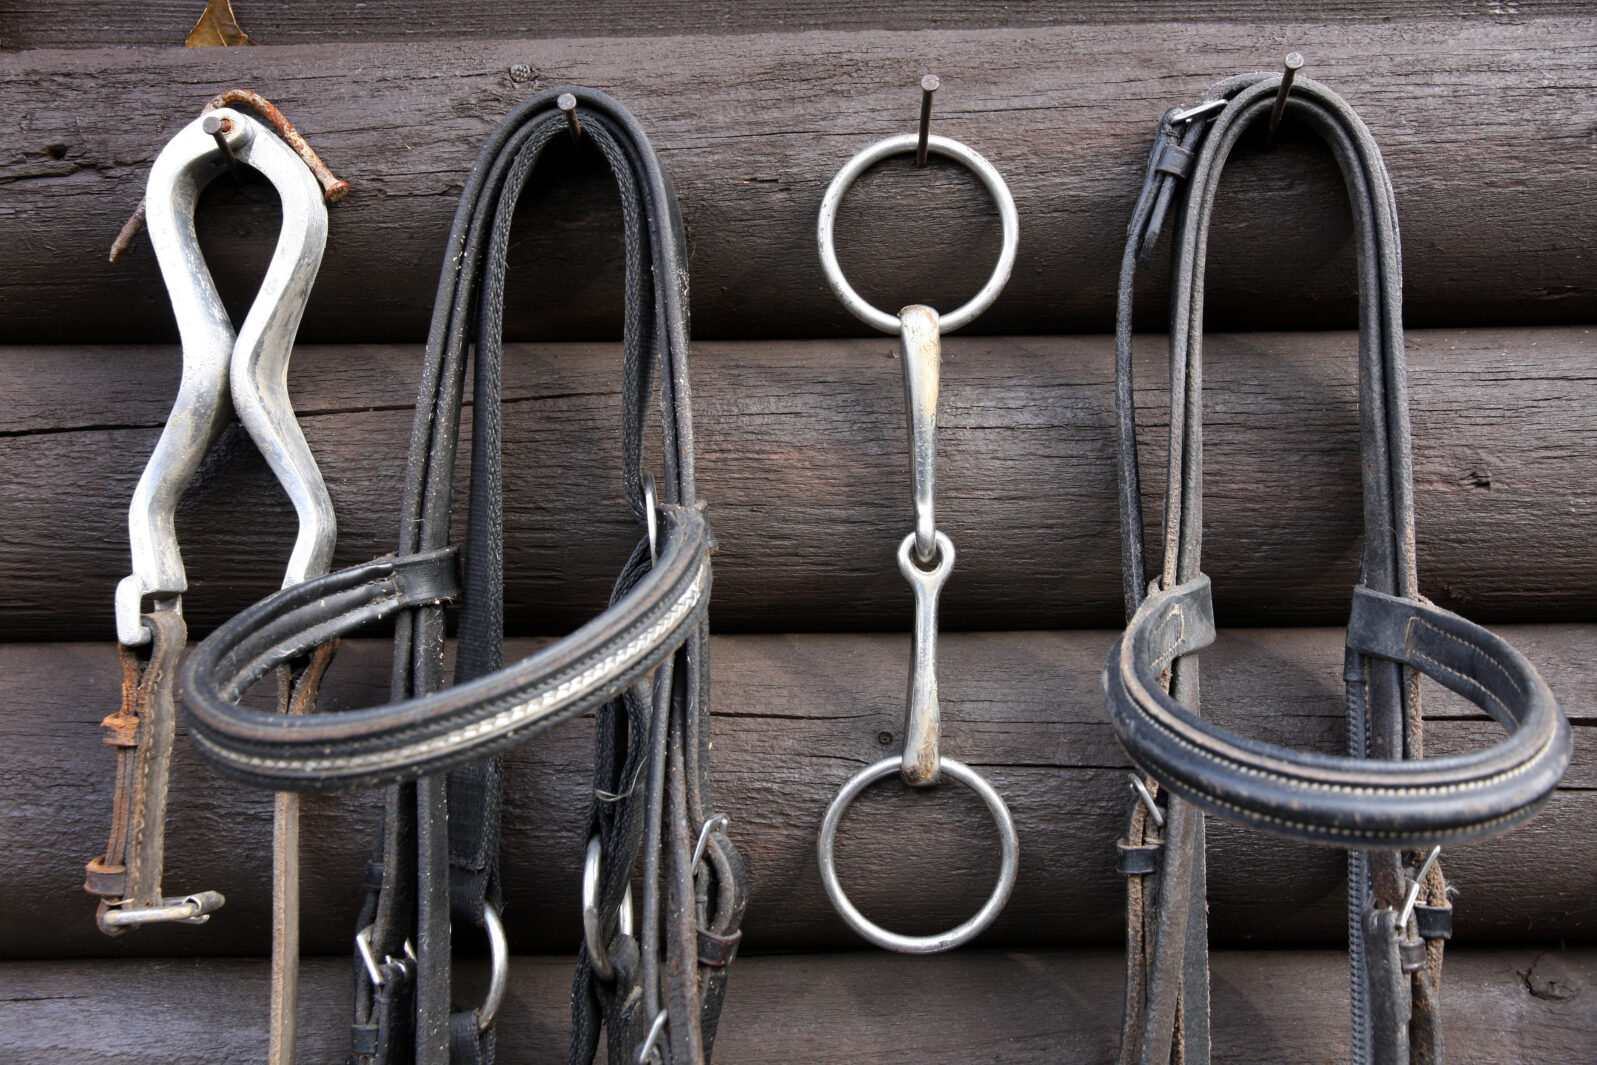 Details of diversity used horse reins